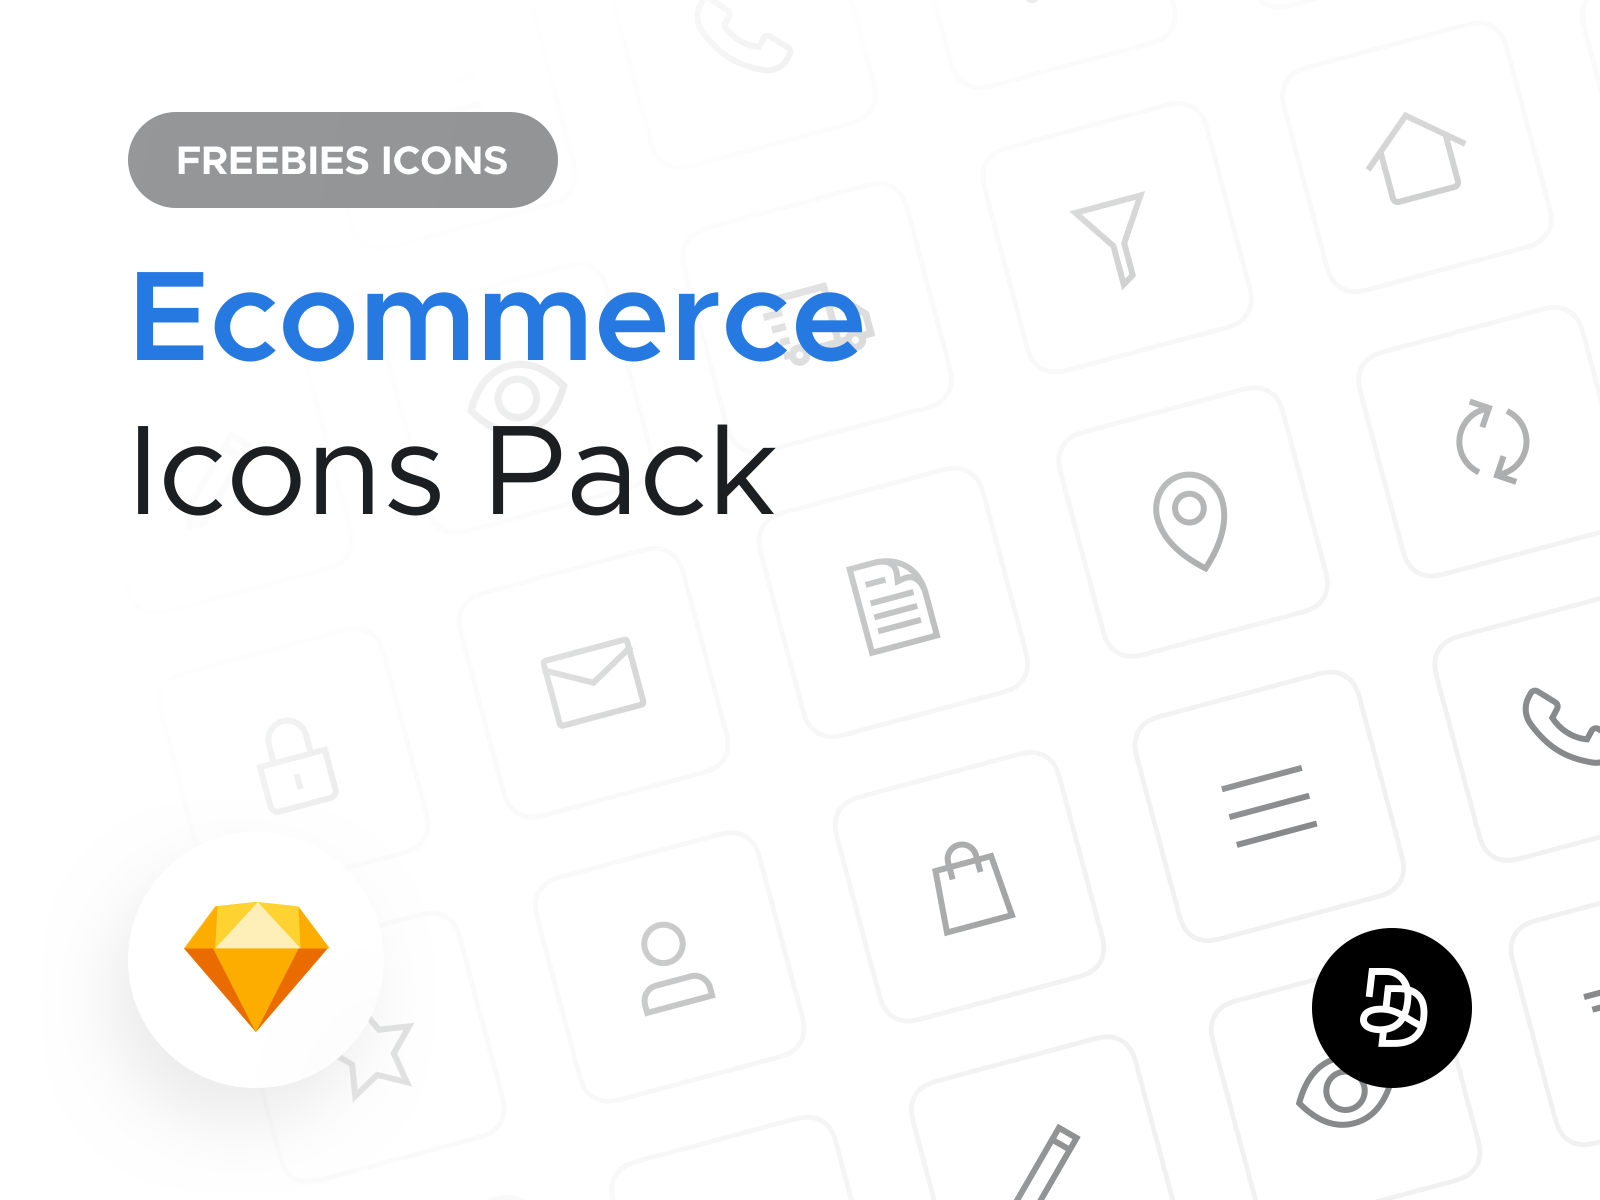 Free Ecommerce Icons call reload view edit star lock mail user home filter map icon set ui sketch download outline ecommerce icon free